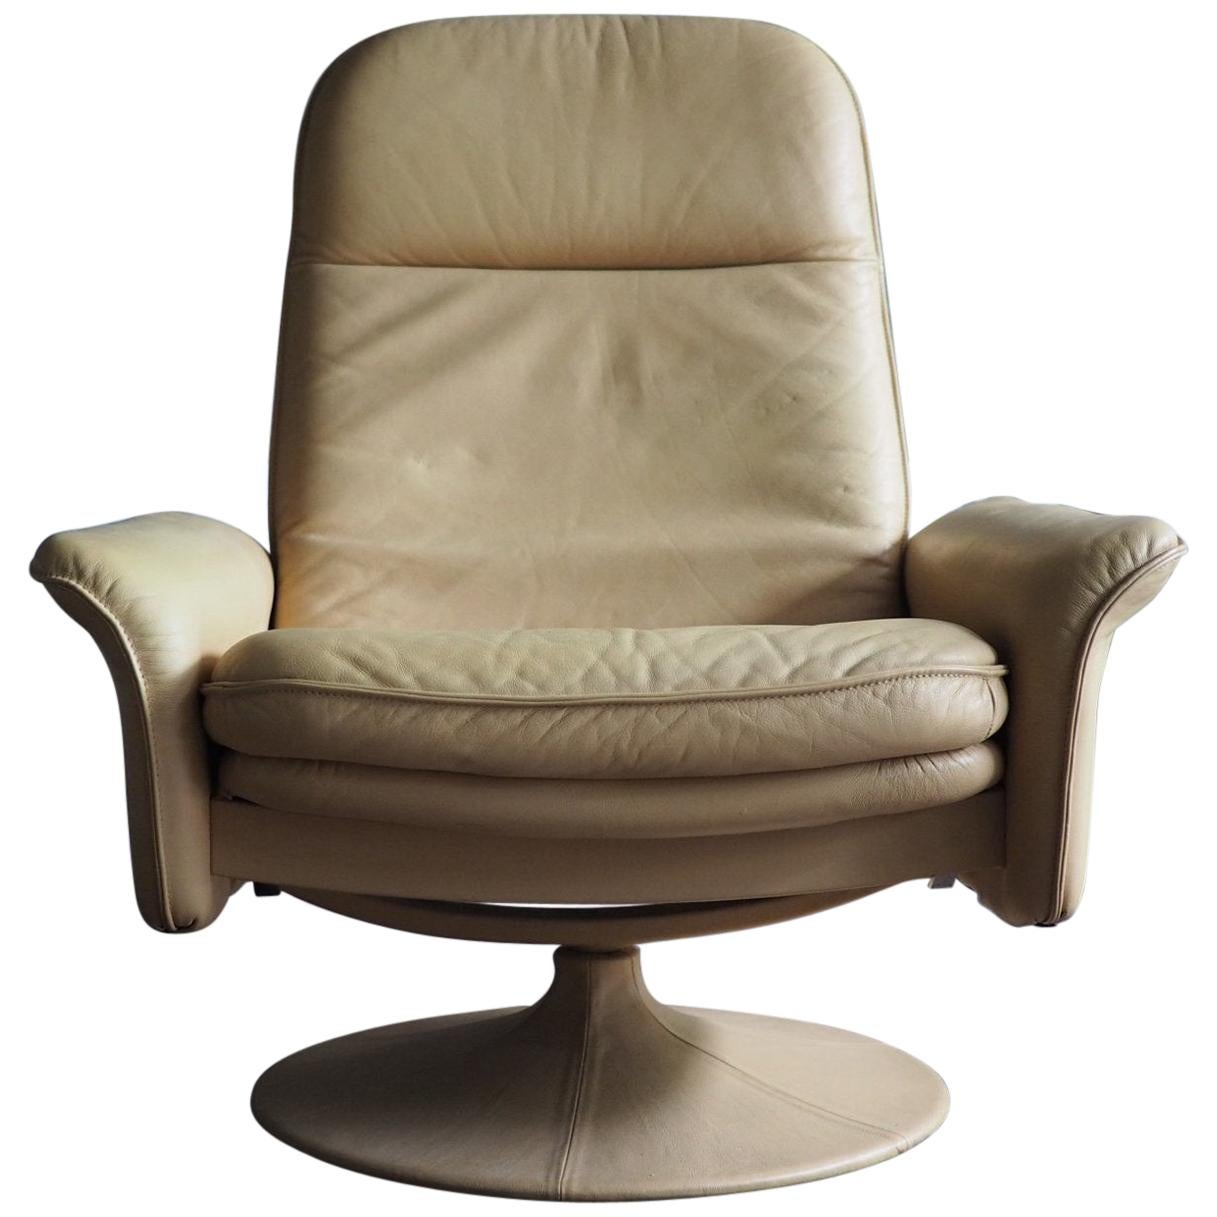 Desede DS50 Executive Lounge Chair, Cream Leather, 1960s